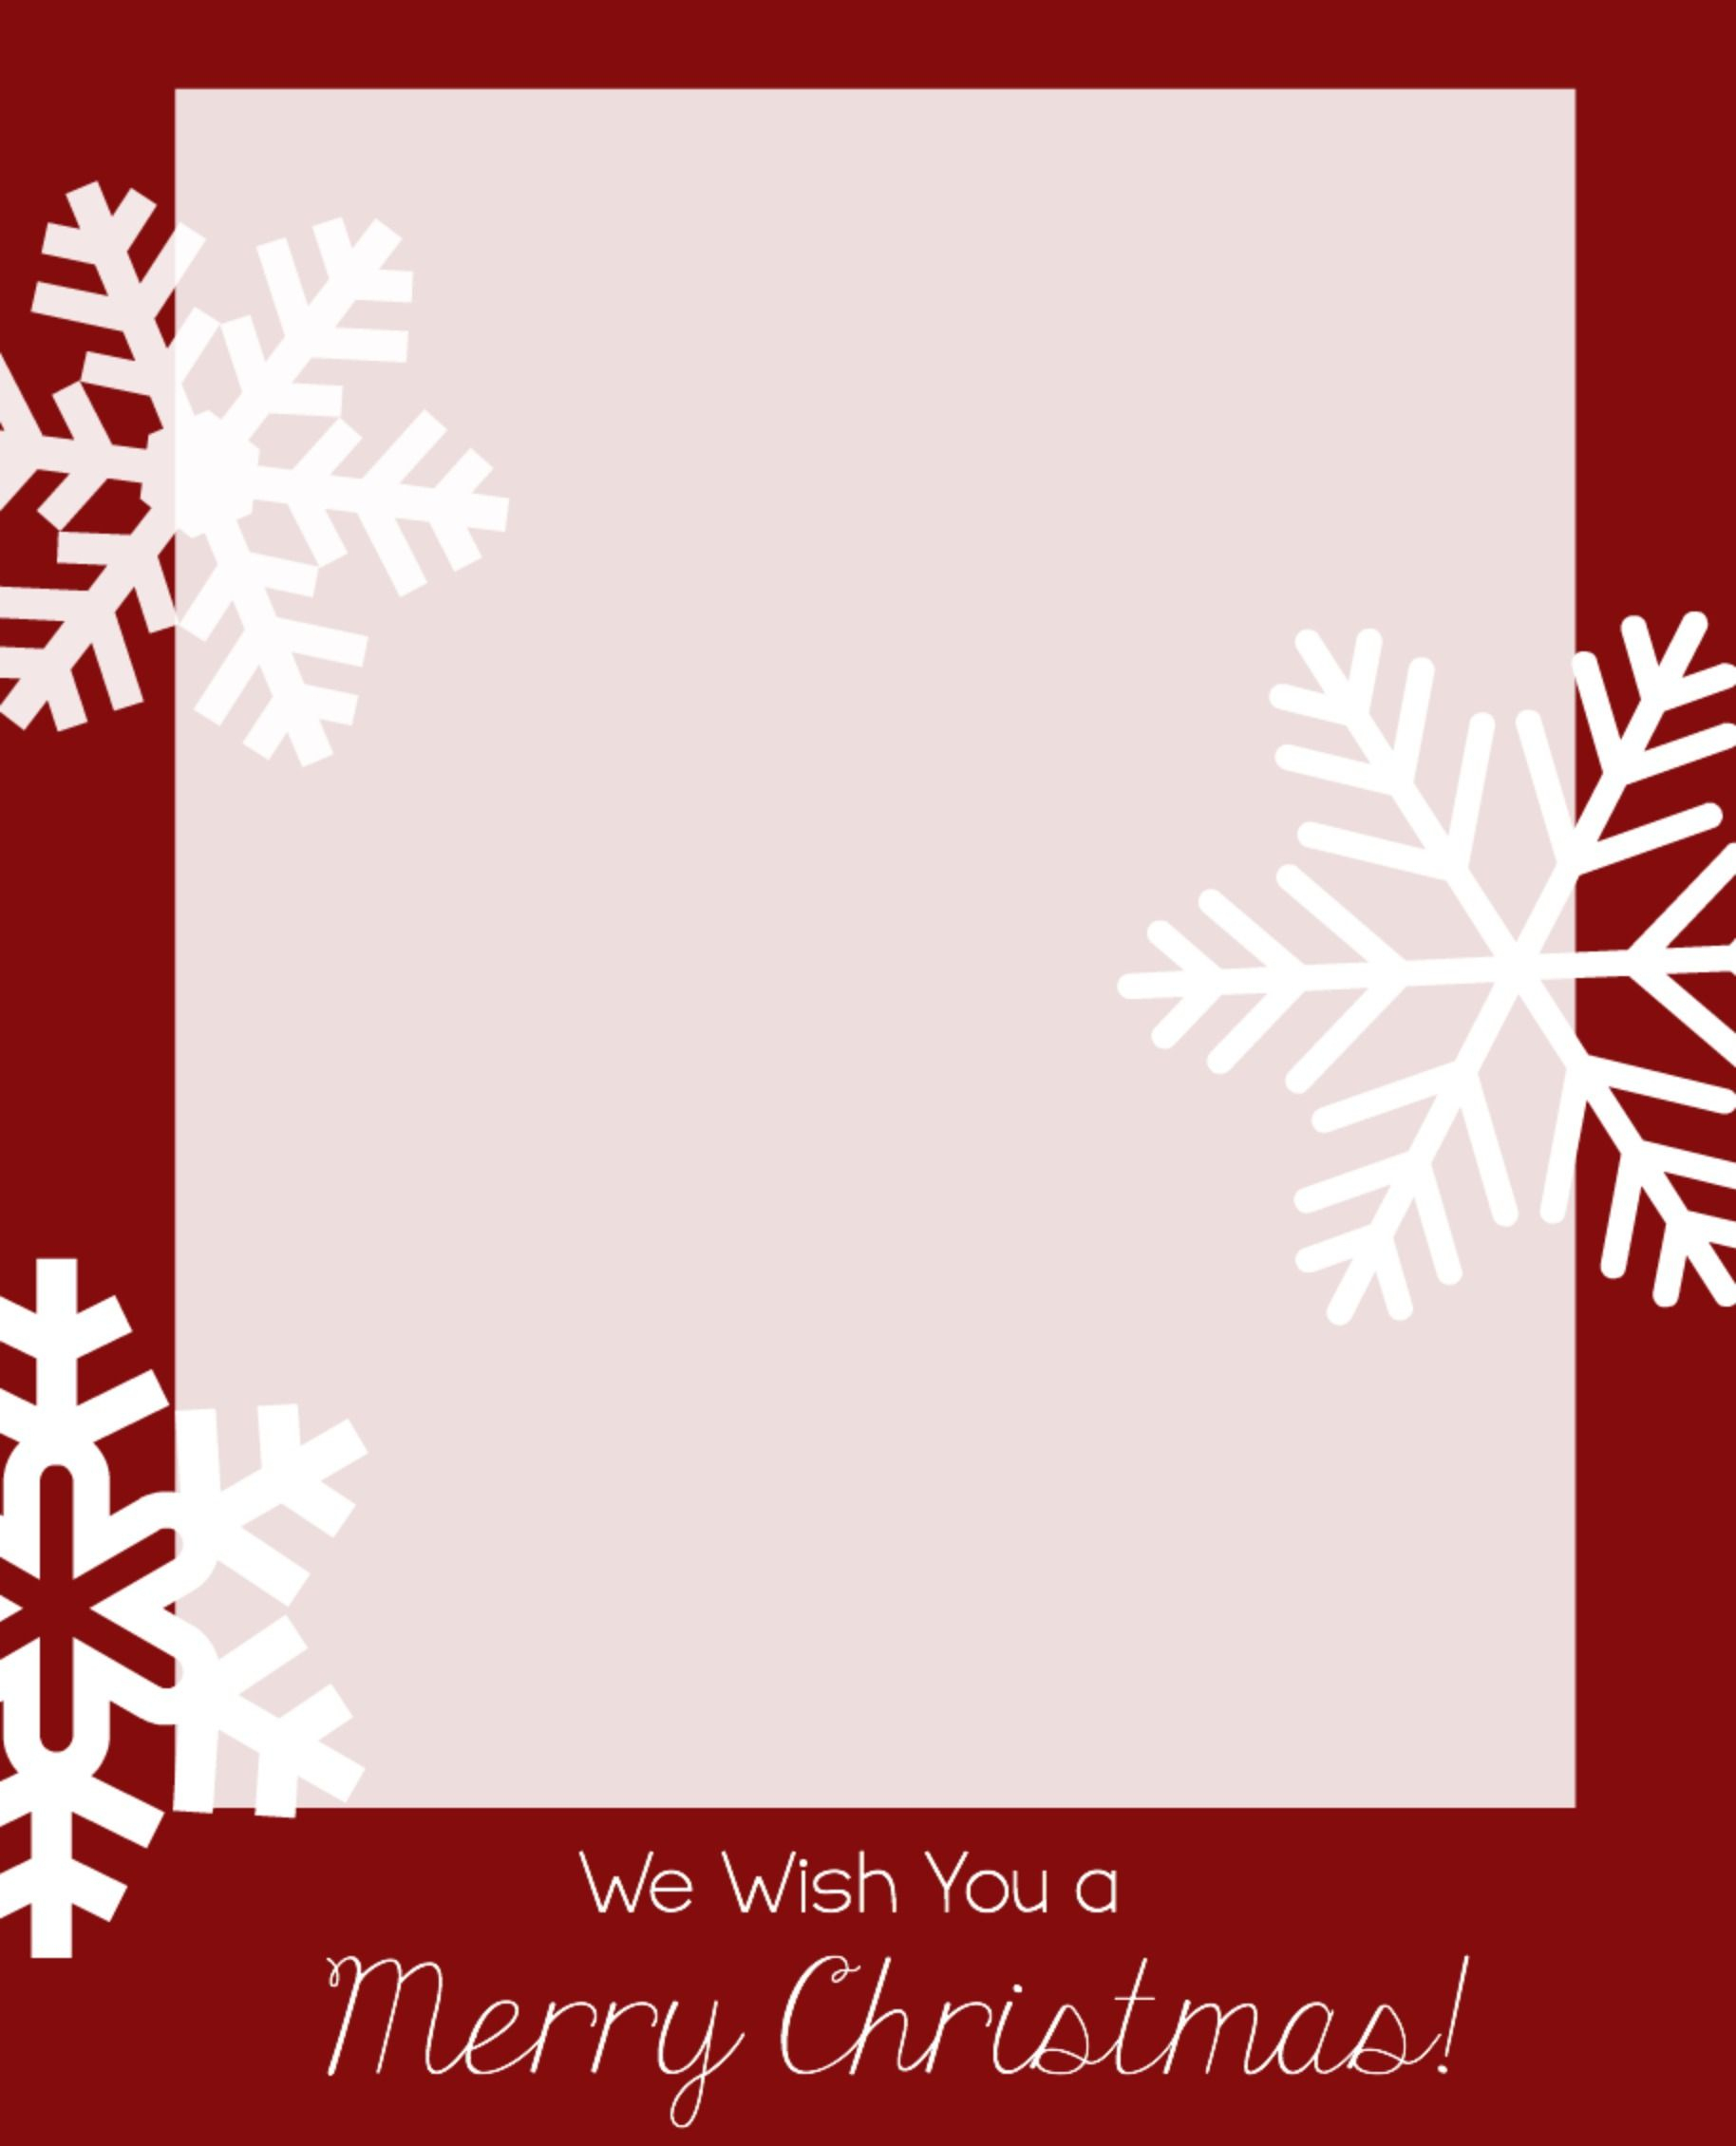 020 Free Photo Card Templates Template Ideas Christmas ~ Ulyssesroom - Free Printable Christmas Cards With Photo Insert